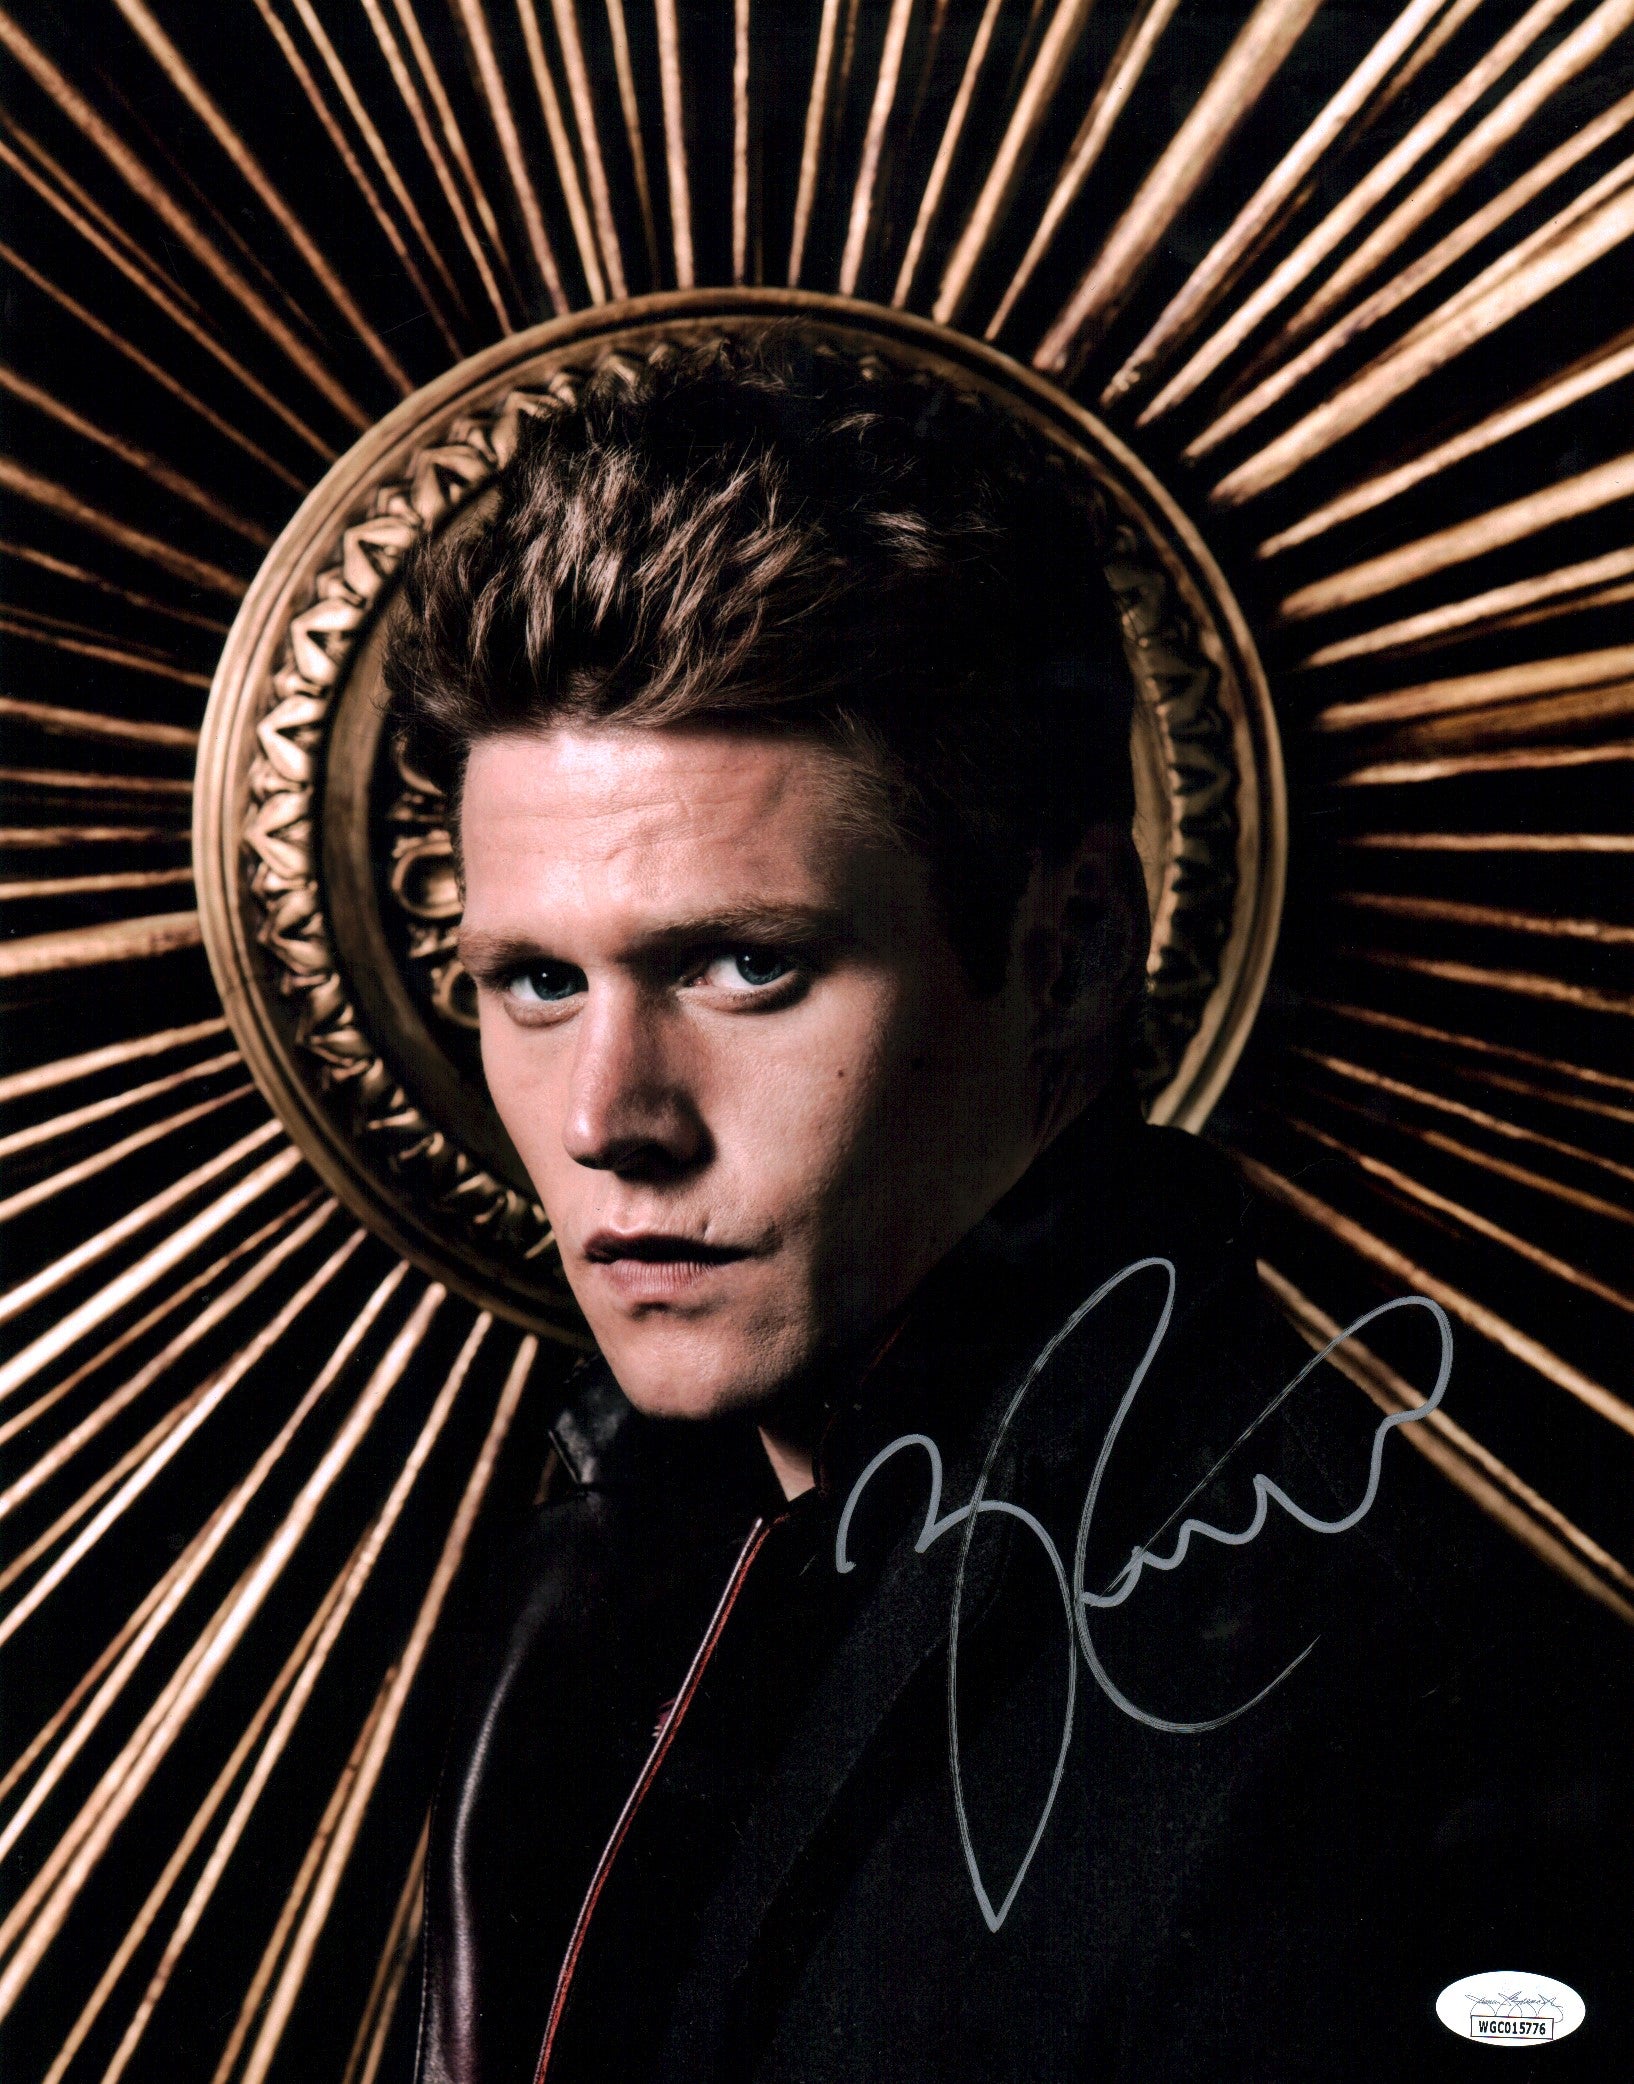 Zach Roerig The Vampire Diaries 11x14 Signed Photo Poster JSA Certified Autograph